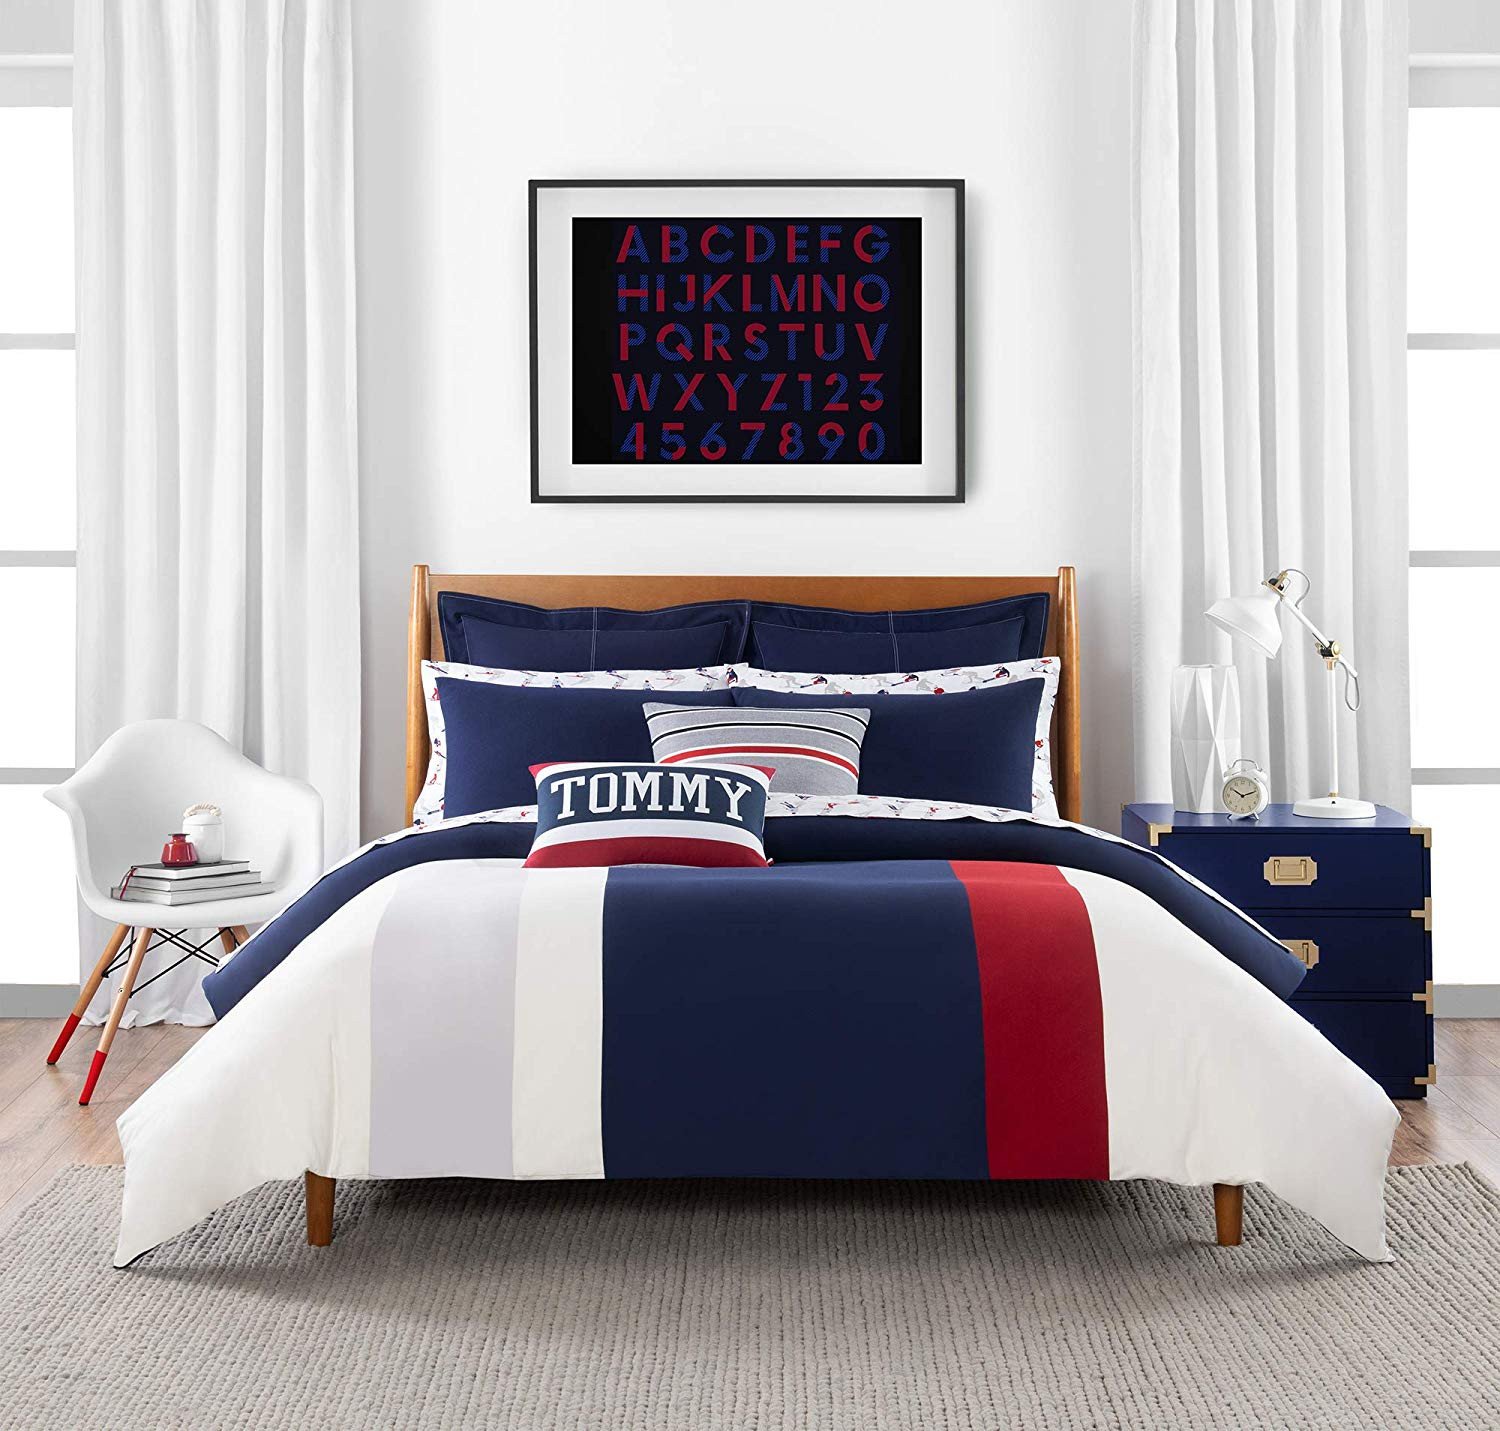 Bedroom Set Full Size Bed New Amazon tommy Hilfiger Clash Of 85 Stripe Bedding